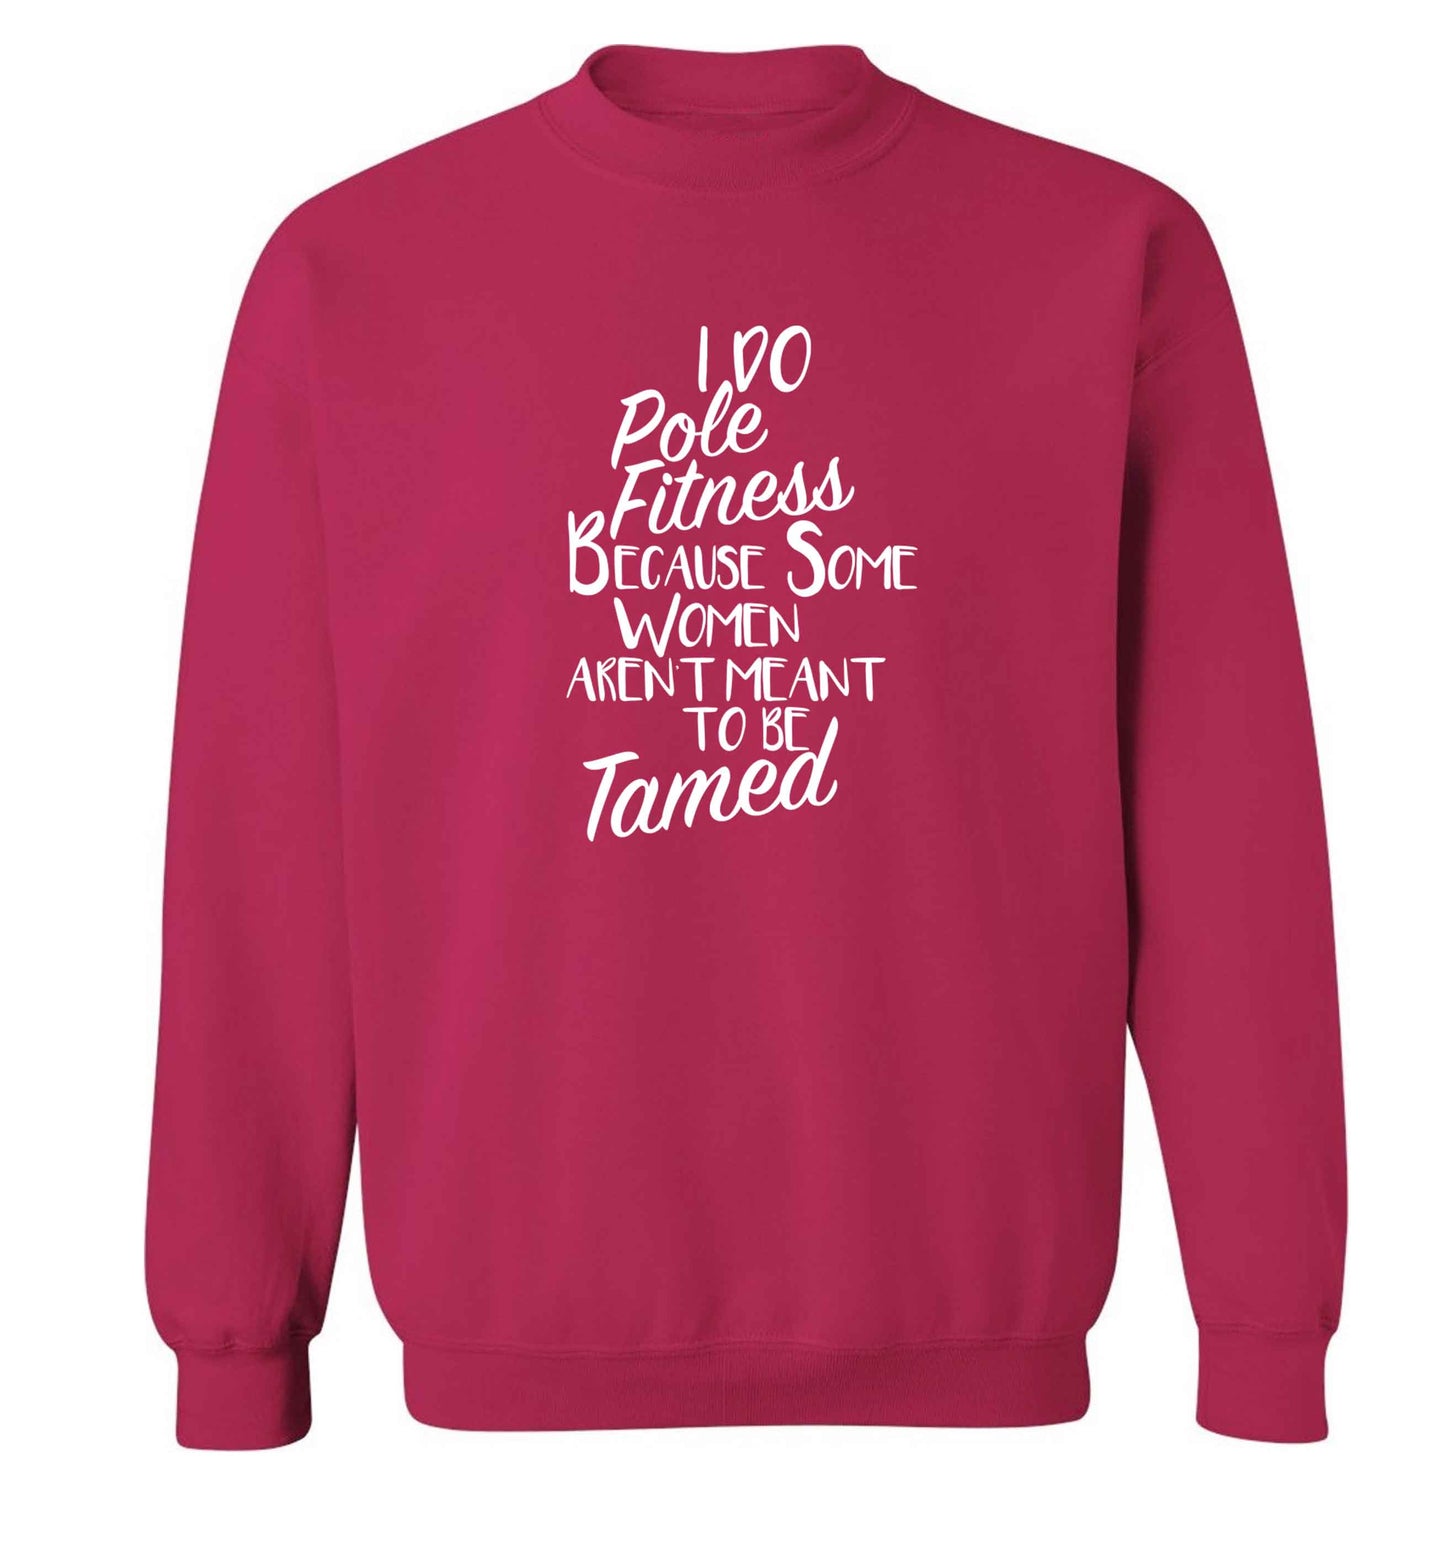 I do pole fitness because some women aren't meant to be tamed adult's unisex pink sweater 2XL